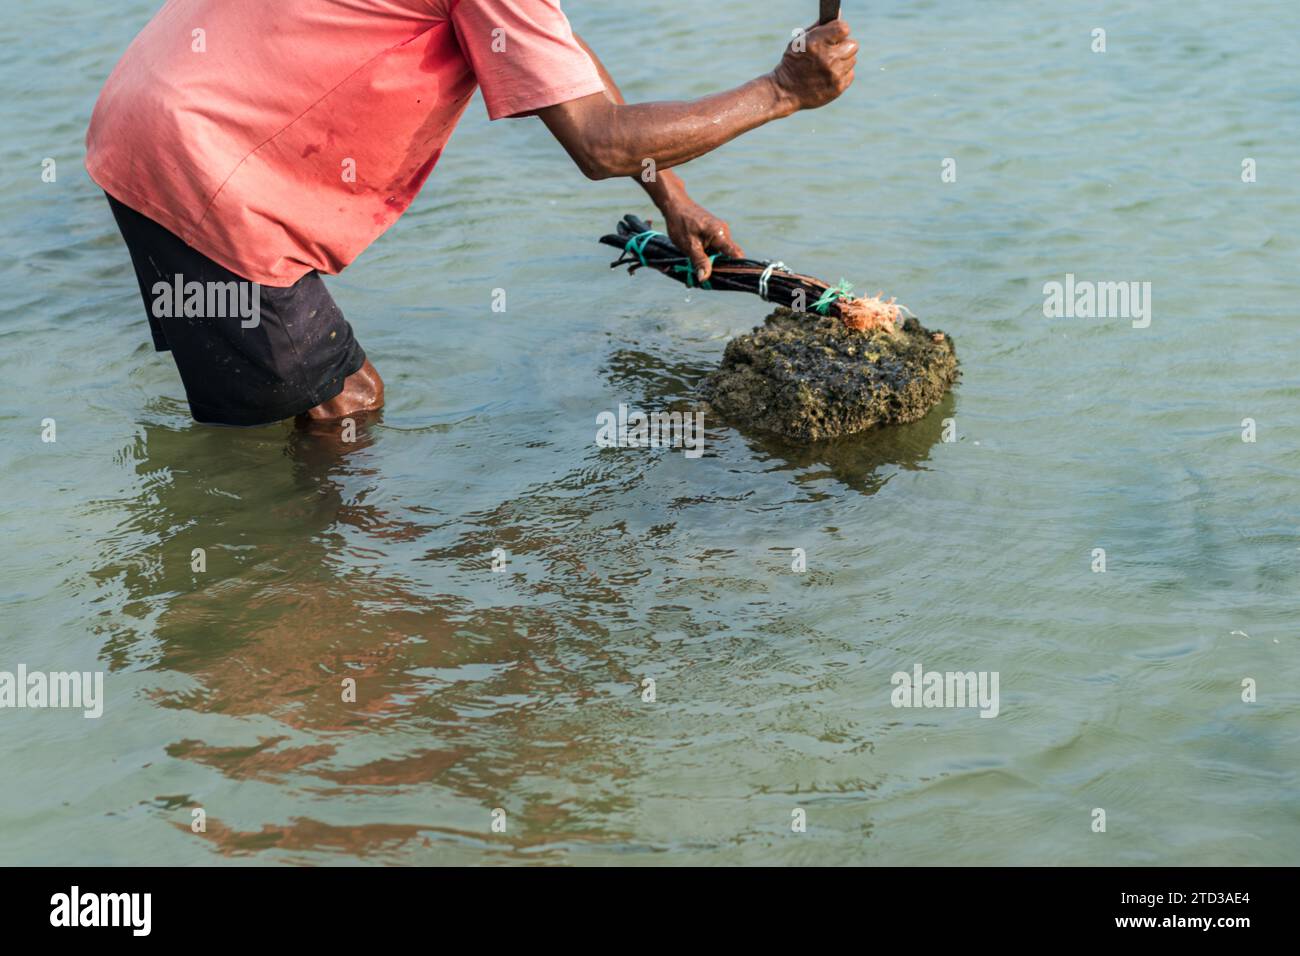 People catch fish using poison from the roots of the tuba plant or Derris. environmental problems Stock Photo